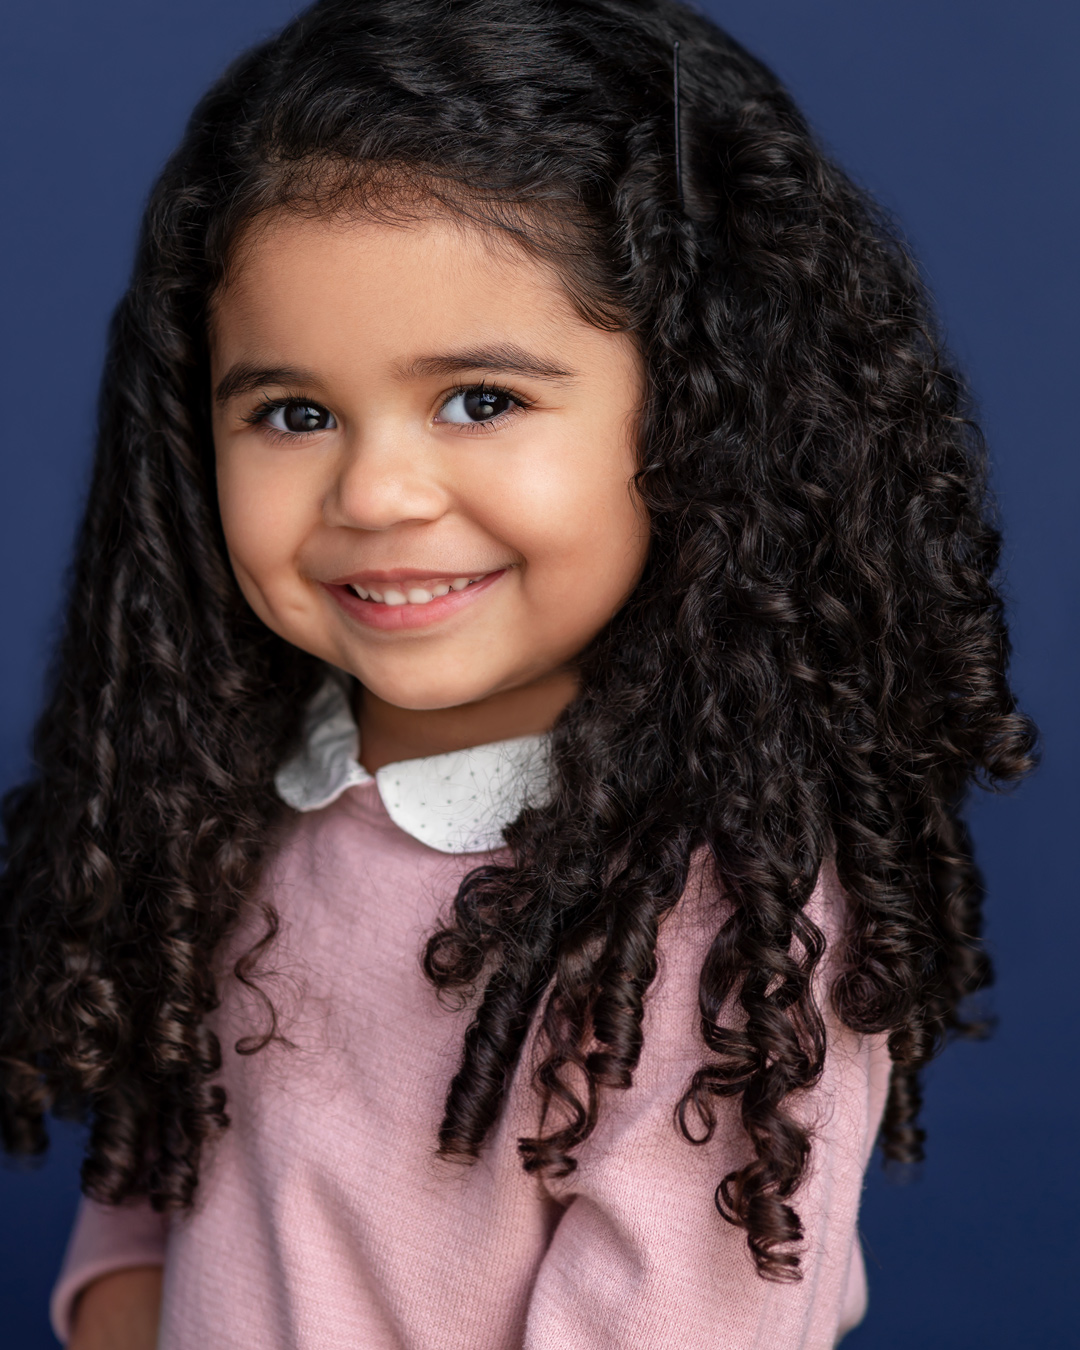 3 year old child actress headshots vancouver